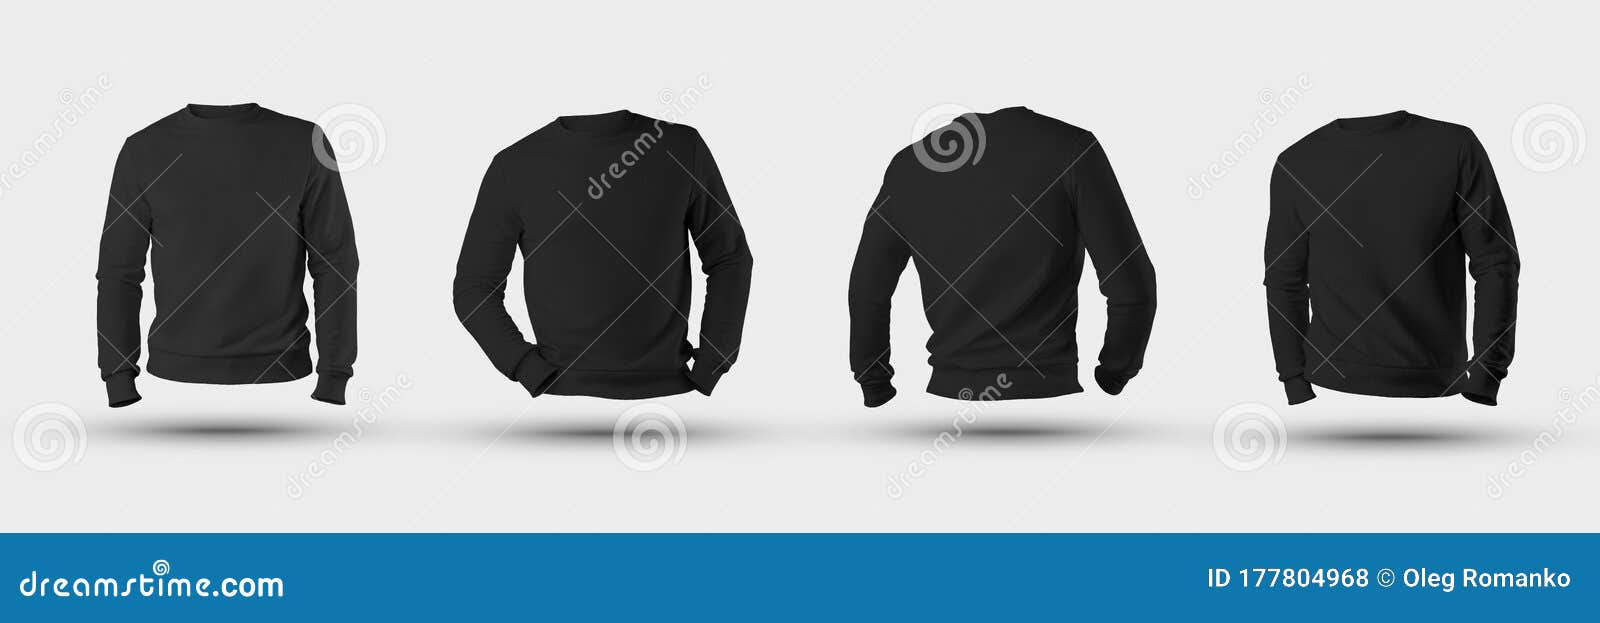 Mockup Blank Male Sweatshirt 3D Rendering, Front, Back, Isolated on a ...